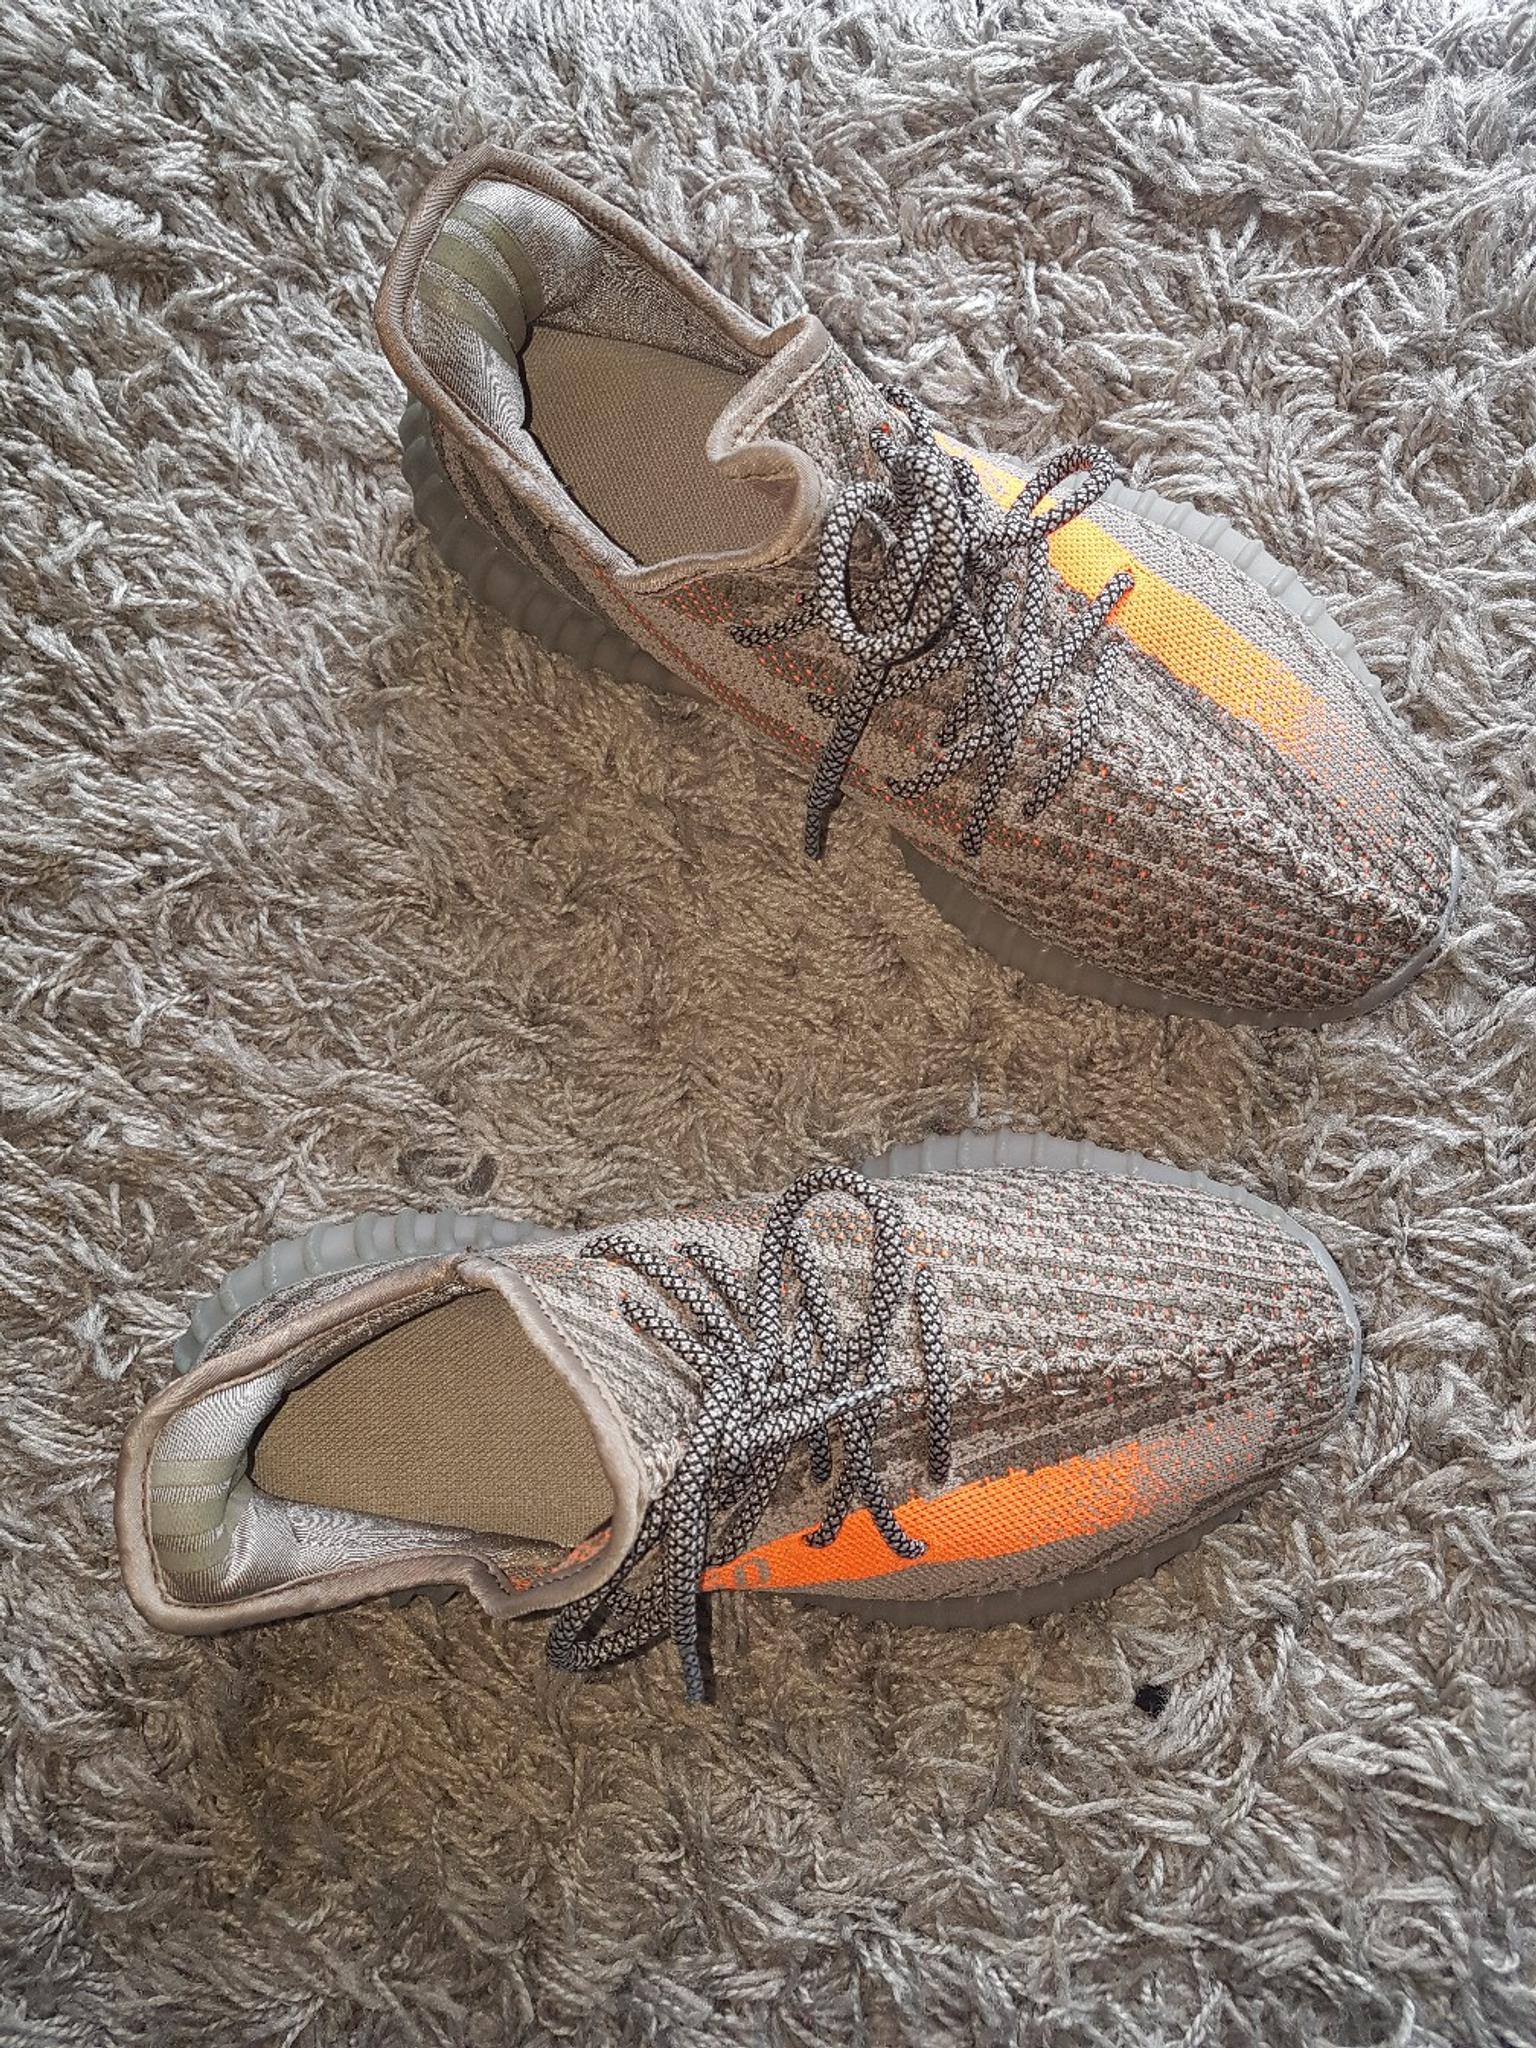 Cheap Adidas Yeezy Boost 350 V2 Sesame 2018 Size 8 Free Shipping